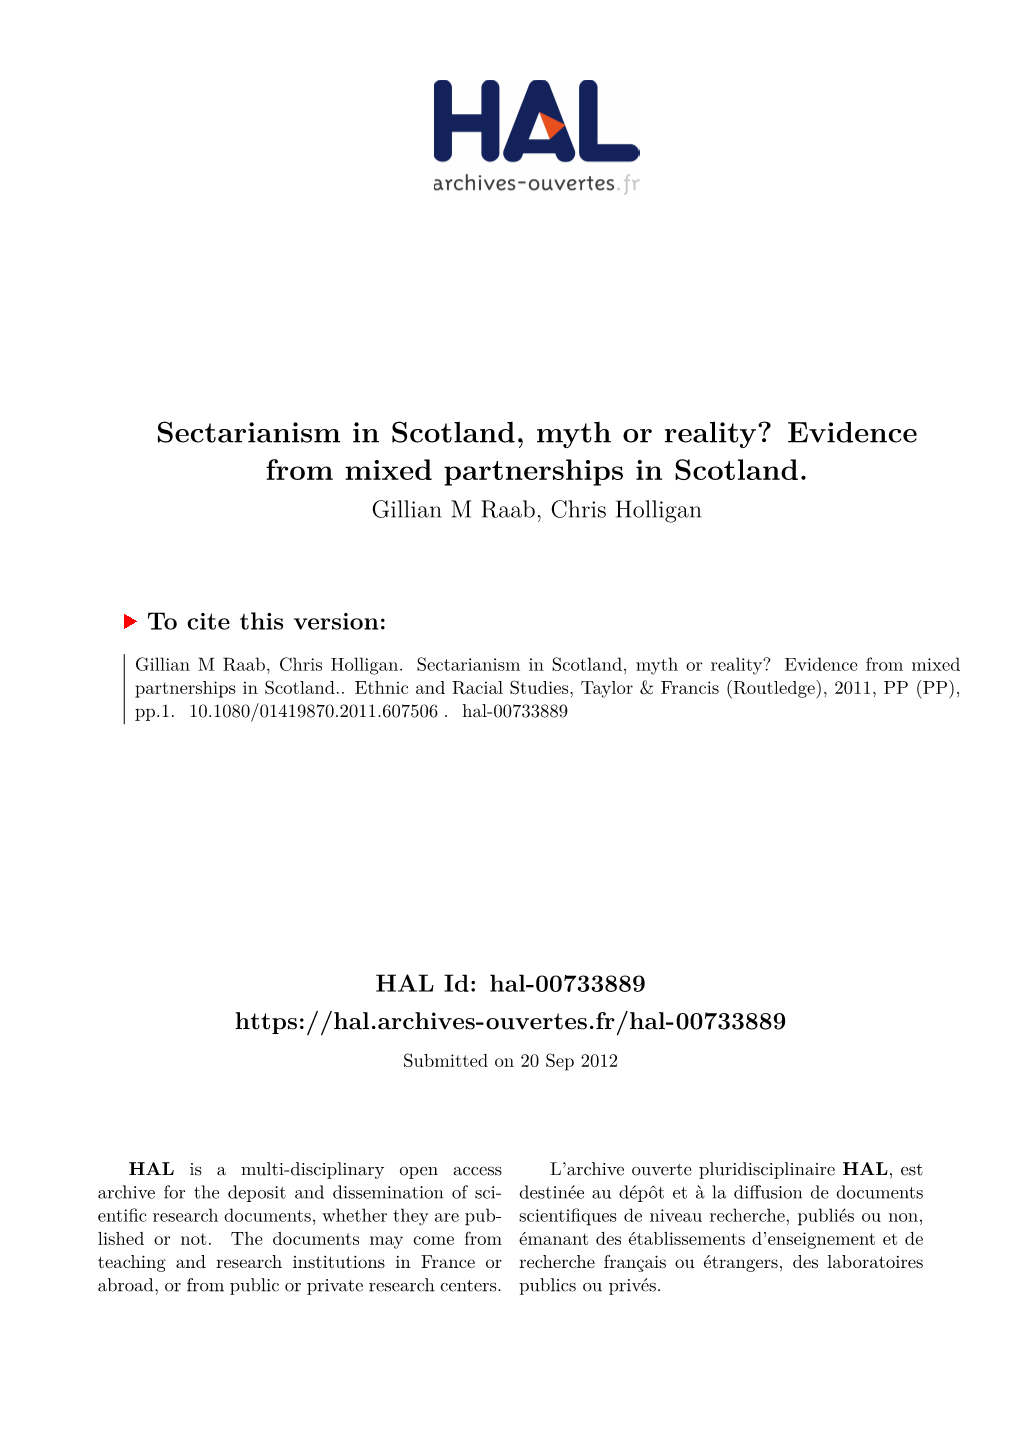 Sectarianism in Scotland, Myth Or Reality? Evidence from Mixed Partnerships in Scotland